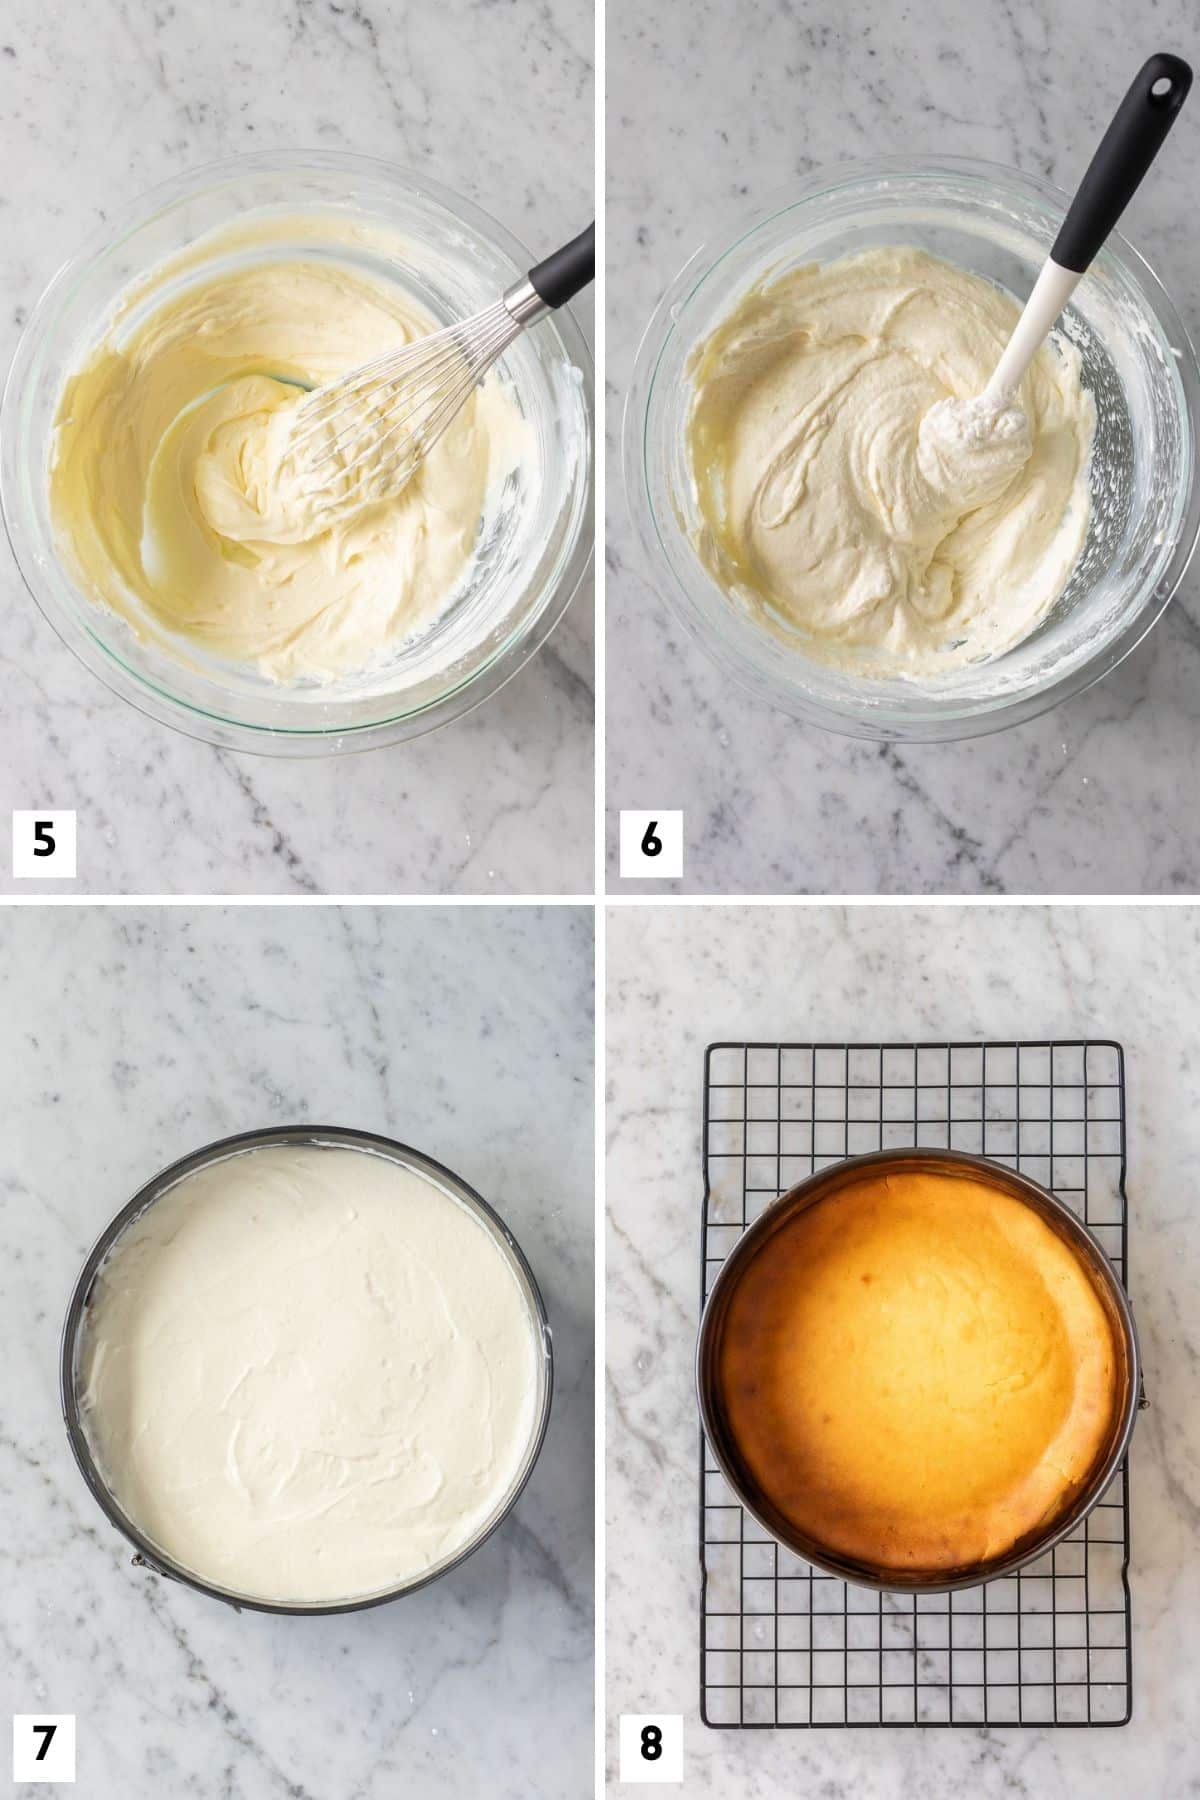 More steps for making a German cheesecake.